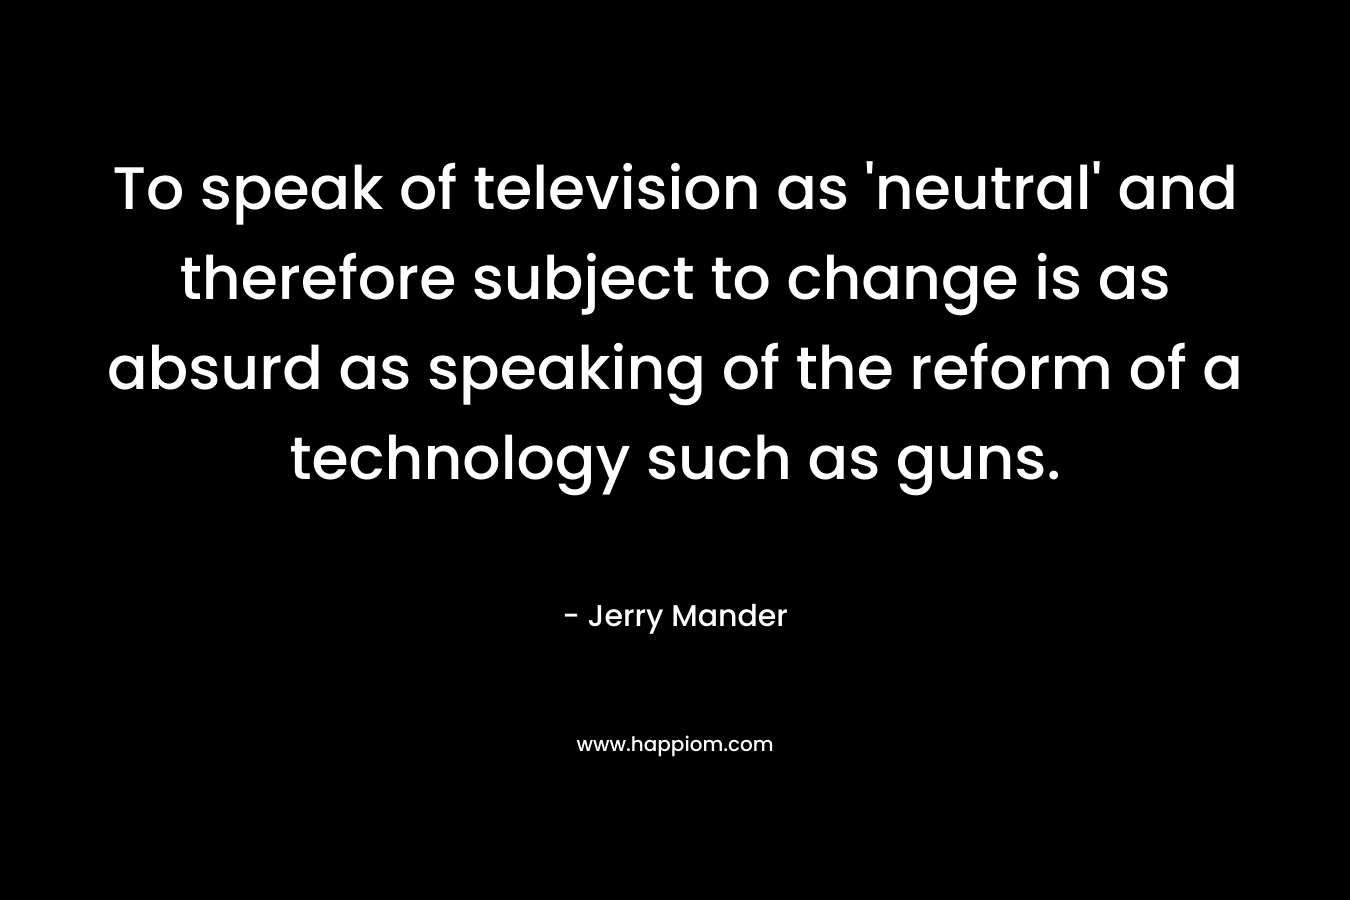 To speak of television as ‘neutral’ and therefore subject to change is as absurd as speaking of the reform of a technology such as guns. – Jerry Mander